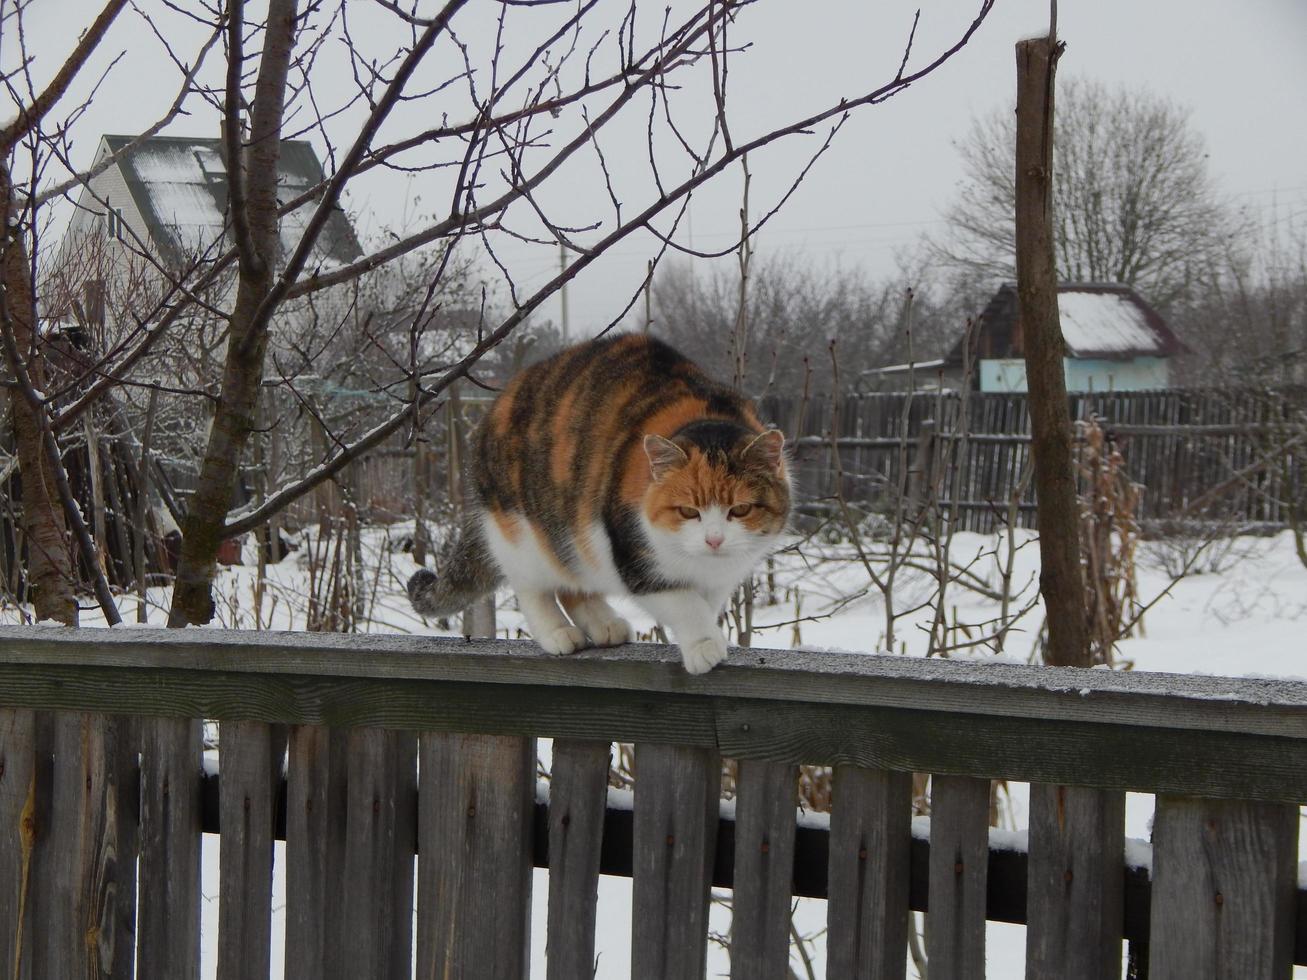 The cat crawls on the fence in winter photo